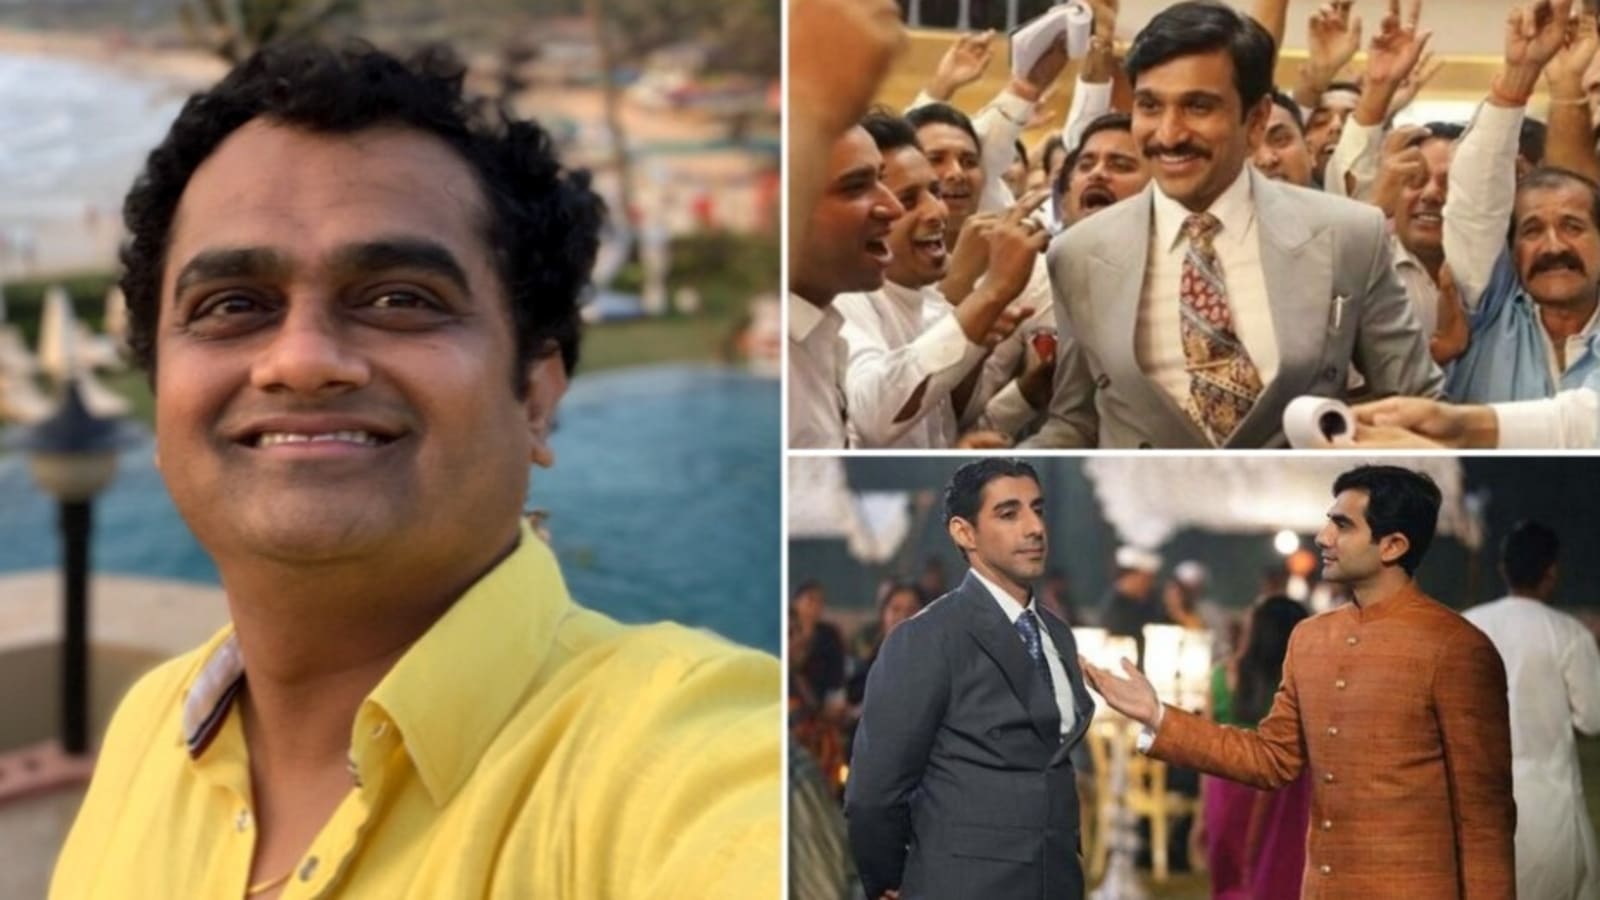 We aren’t looking for star value: Interview with SonyLIV content head Ashish Golwalkar